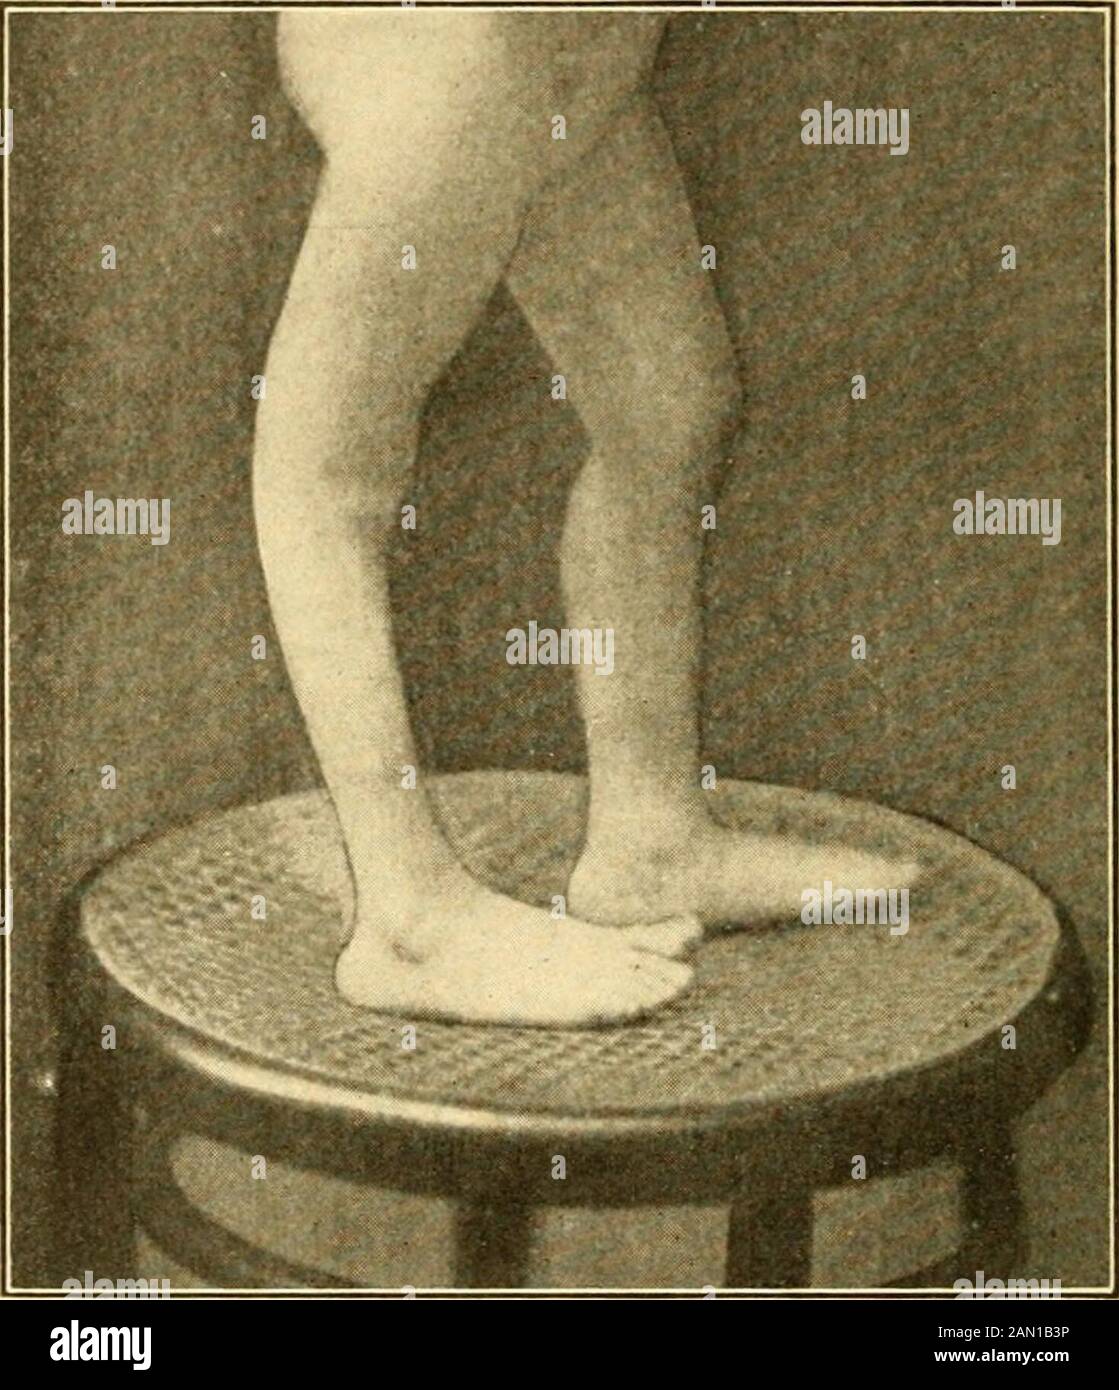 Modern diagnosis and treatment of diseases of childern; a treatise on the medical and surgical diseases of infancy anf childhood . irst few weeks or months, it usually persists for life. The per-manently paralyzed structures soon begin to waste and undergofatty degeneration. The muscles are flabby and thin and thearticular bands so lax that the limb appears elongated and isprone to slip out of joint. Frequently there is also atrophy ofthe bones. As an immediate result of the atrophy of the diseased partsand the unopposed action (contraction) of the non-paralyzedantagonistic muscles, the affect Stock Photo